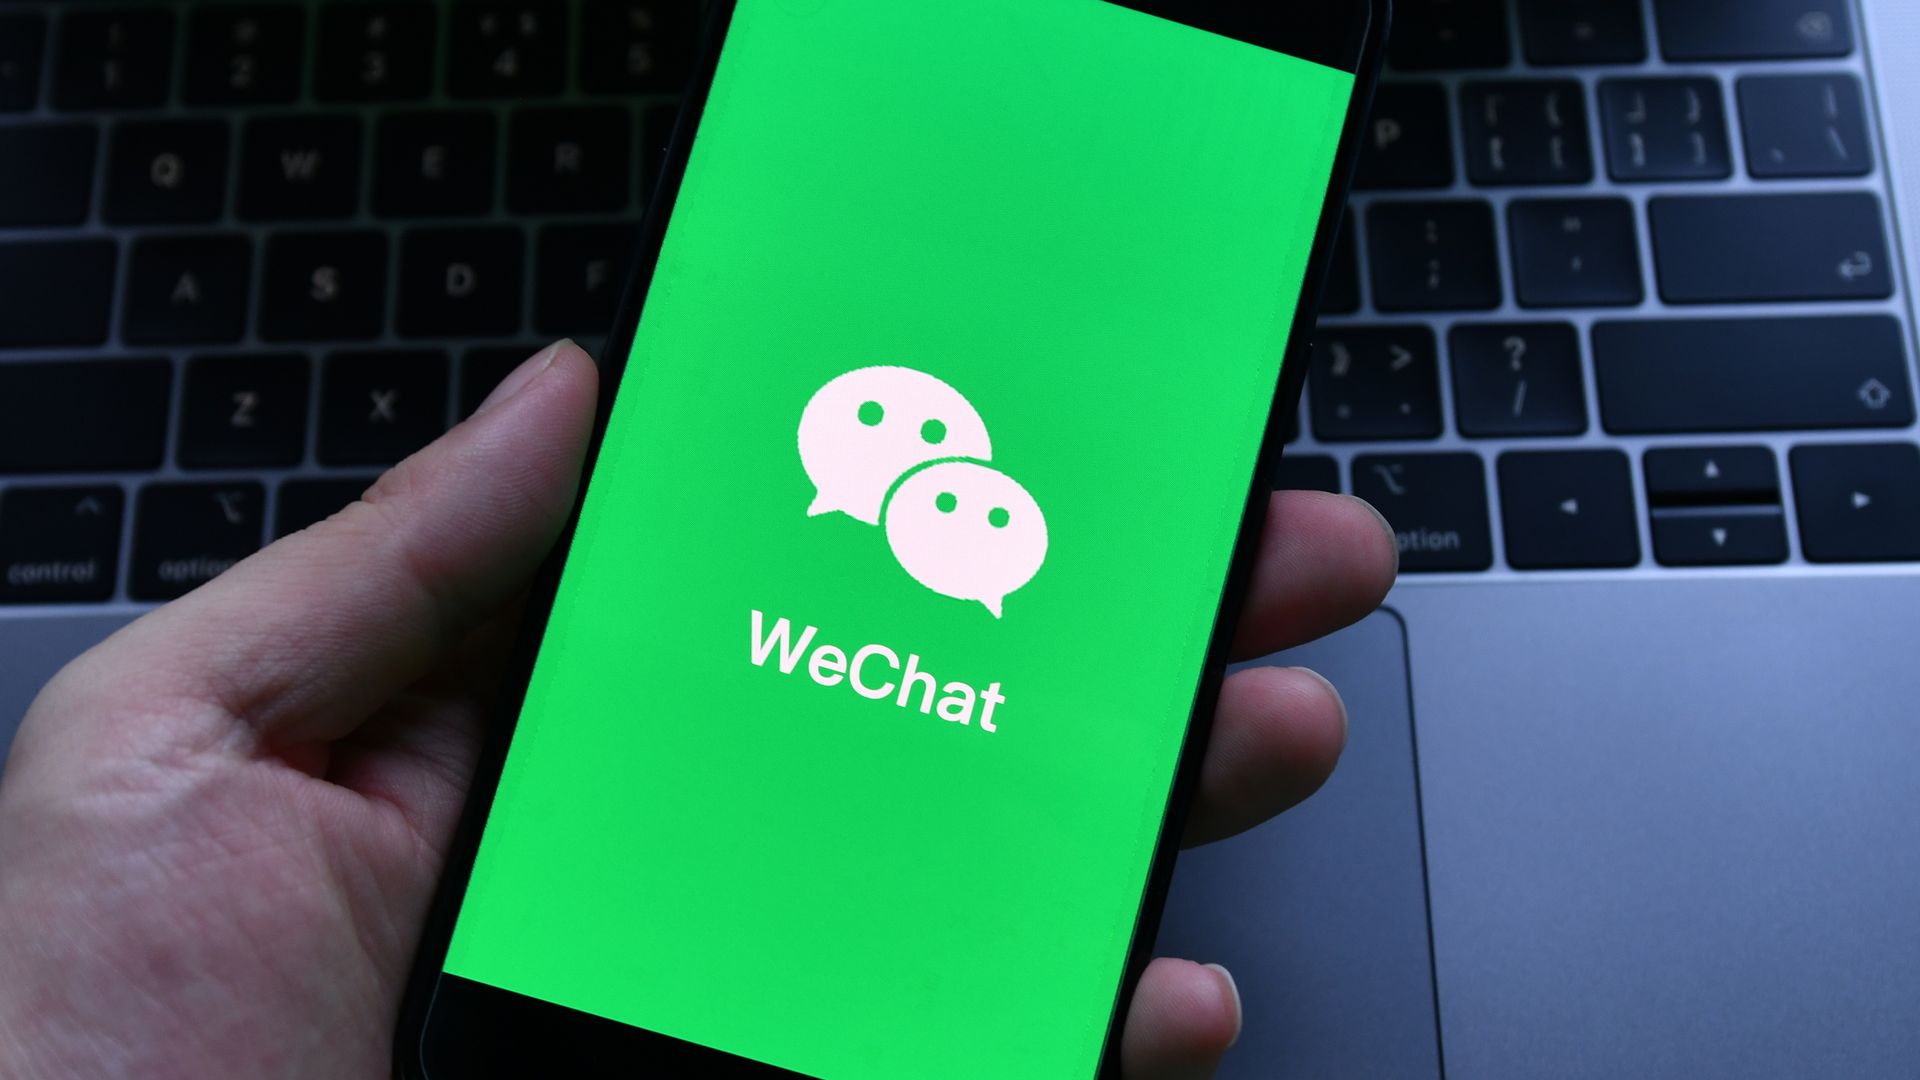 An illustration of the WeChat logo on a phone screen. 